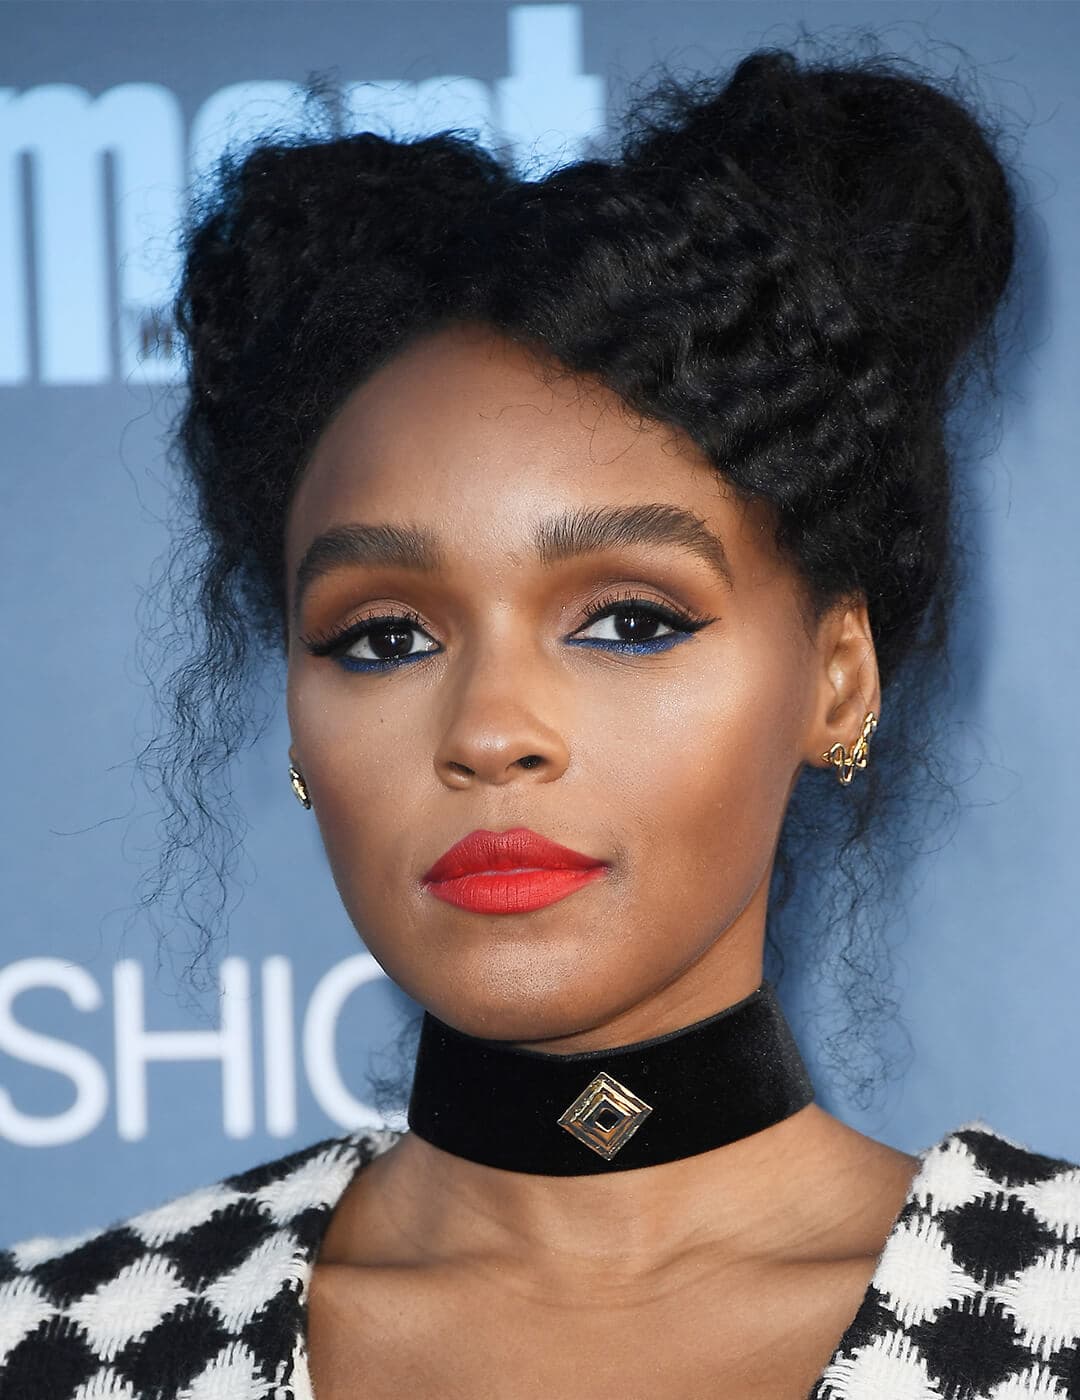 A photo of Janelle Monae styled her black curly hair into space buns wearing a black choker, a shade of red lipstick and a blue eyeliner